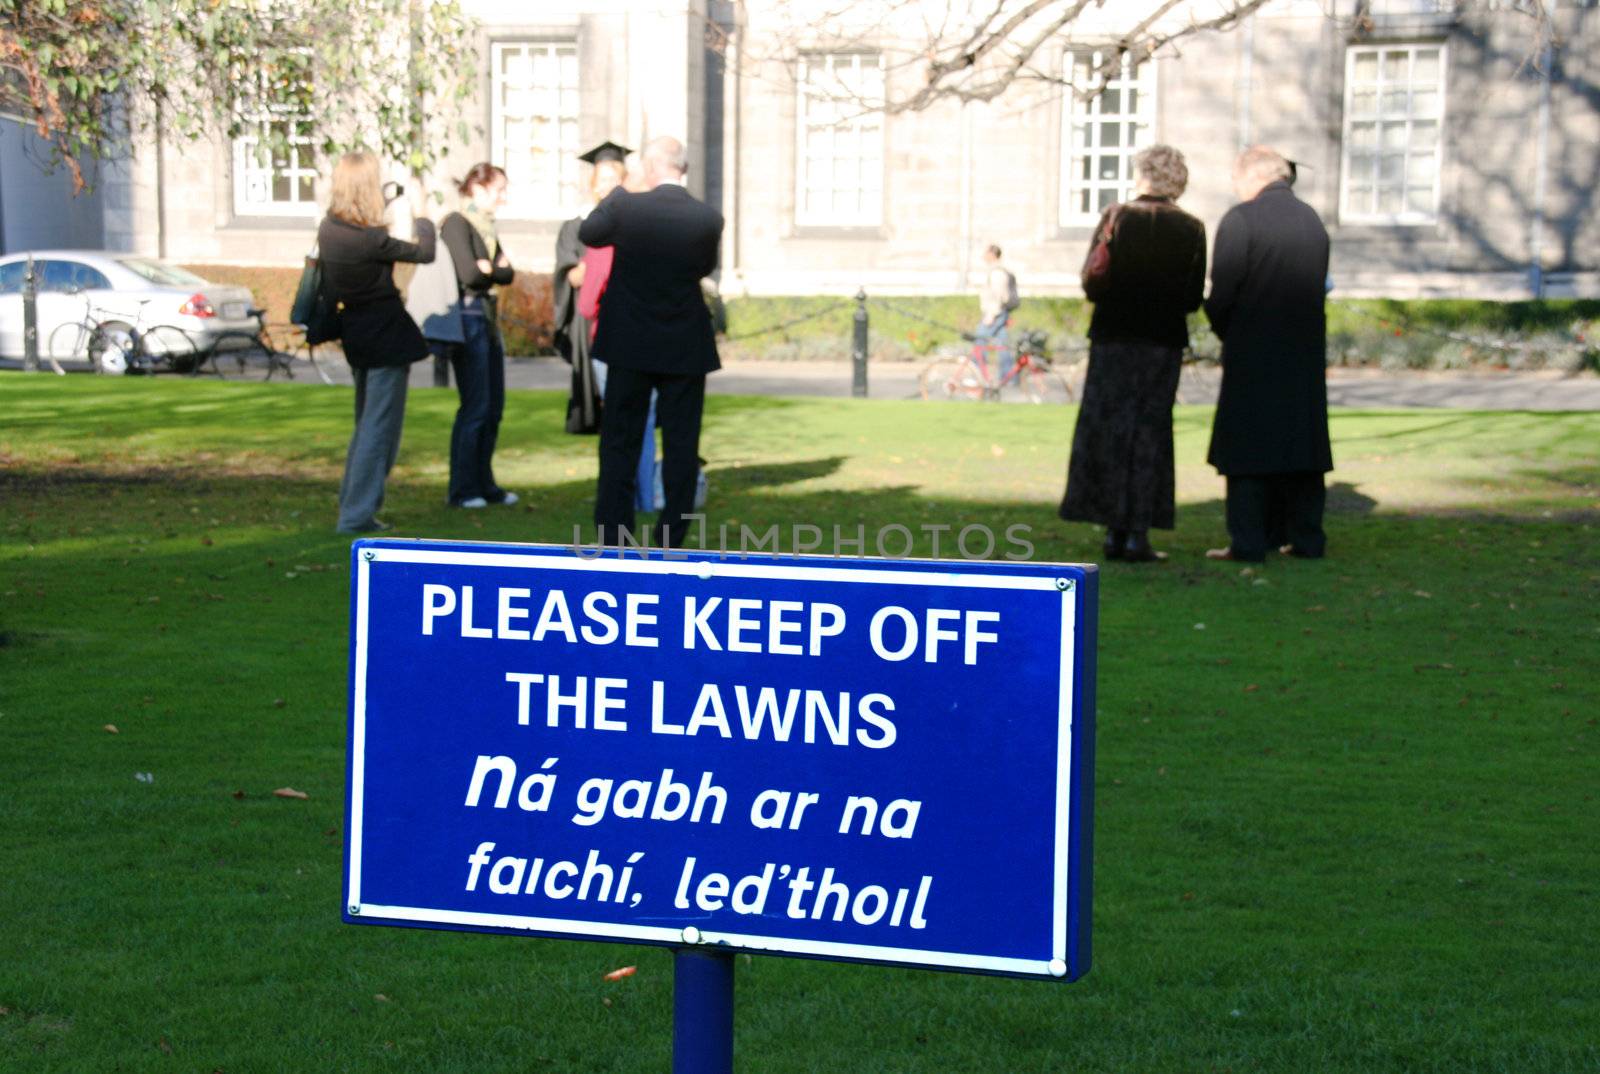 A group of law breaking persons in an Irish city. Very serious crime: not keeping off the lawn. Warning sign in English and Irish.